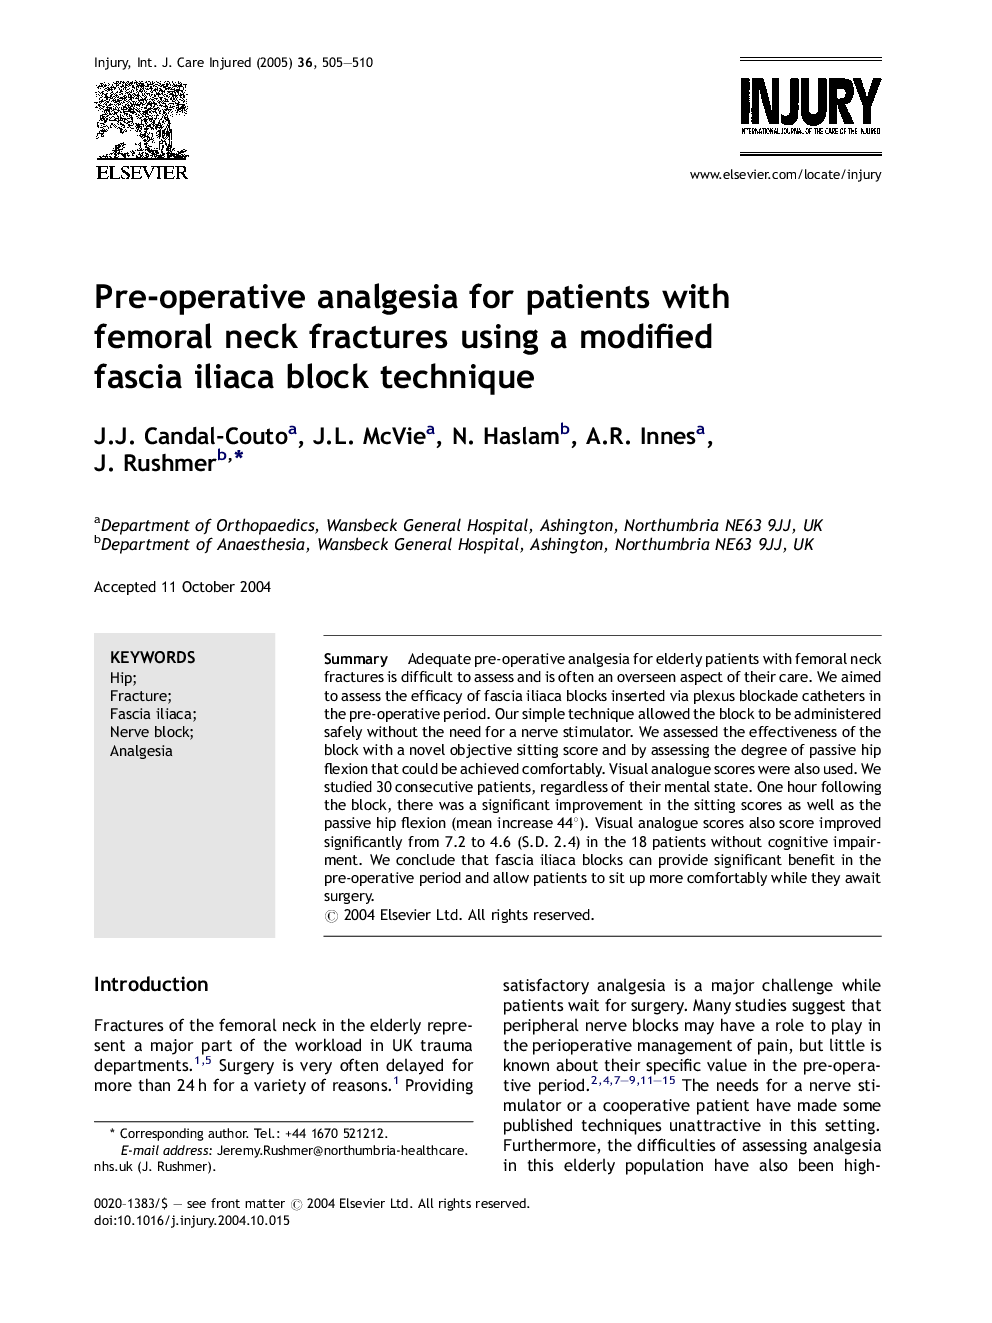 Pre-operative analgesia for patients with femoral neck fractures using a modified fascia iliaca block technique